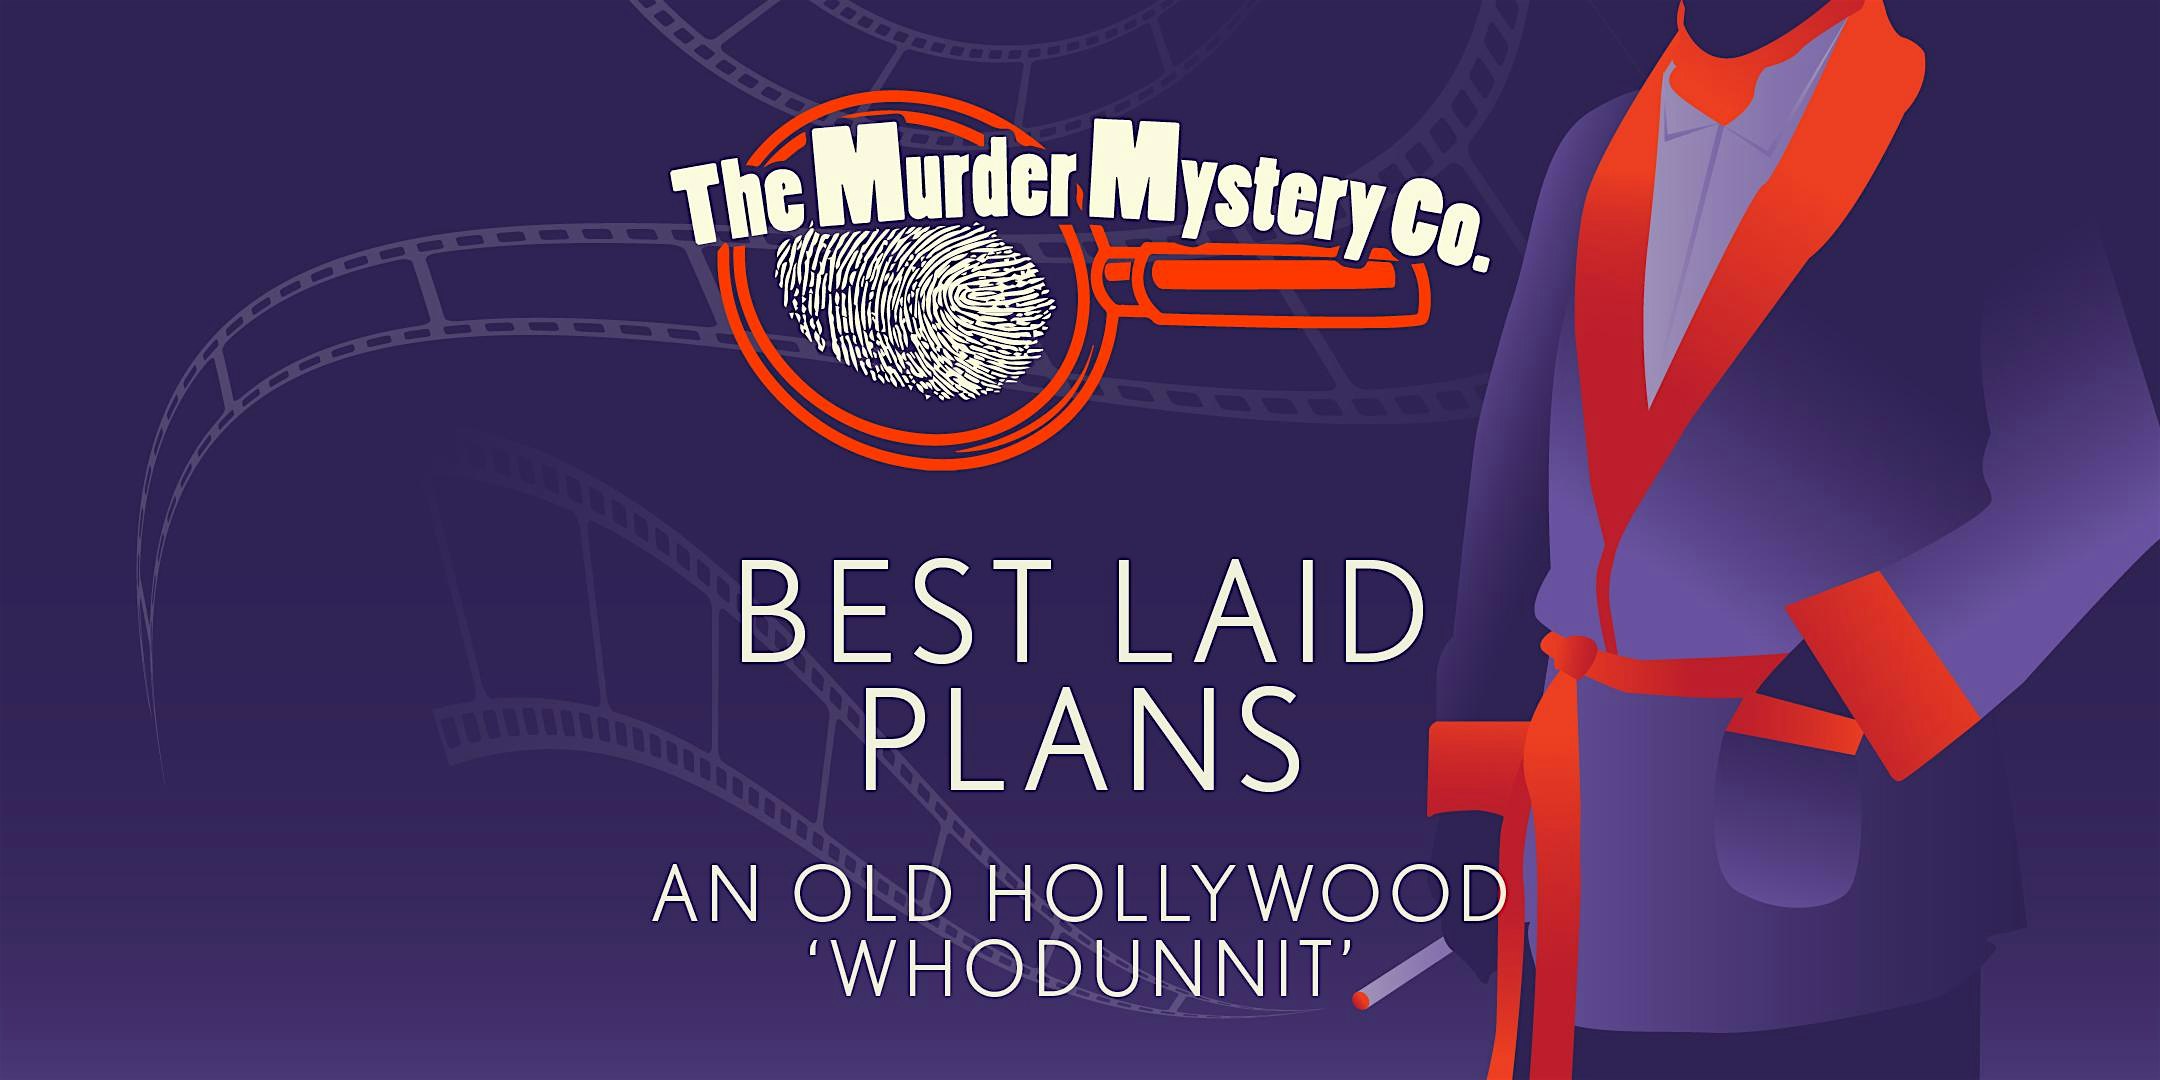 Murder Mystery Dinner Theater Show in Seattle: Best Laid Plans